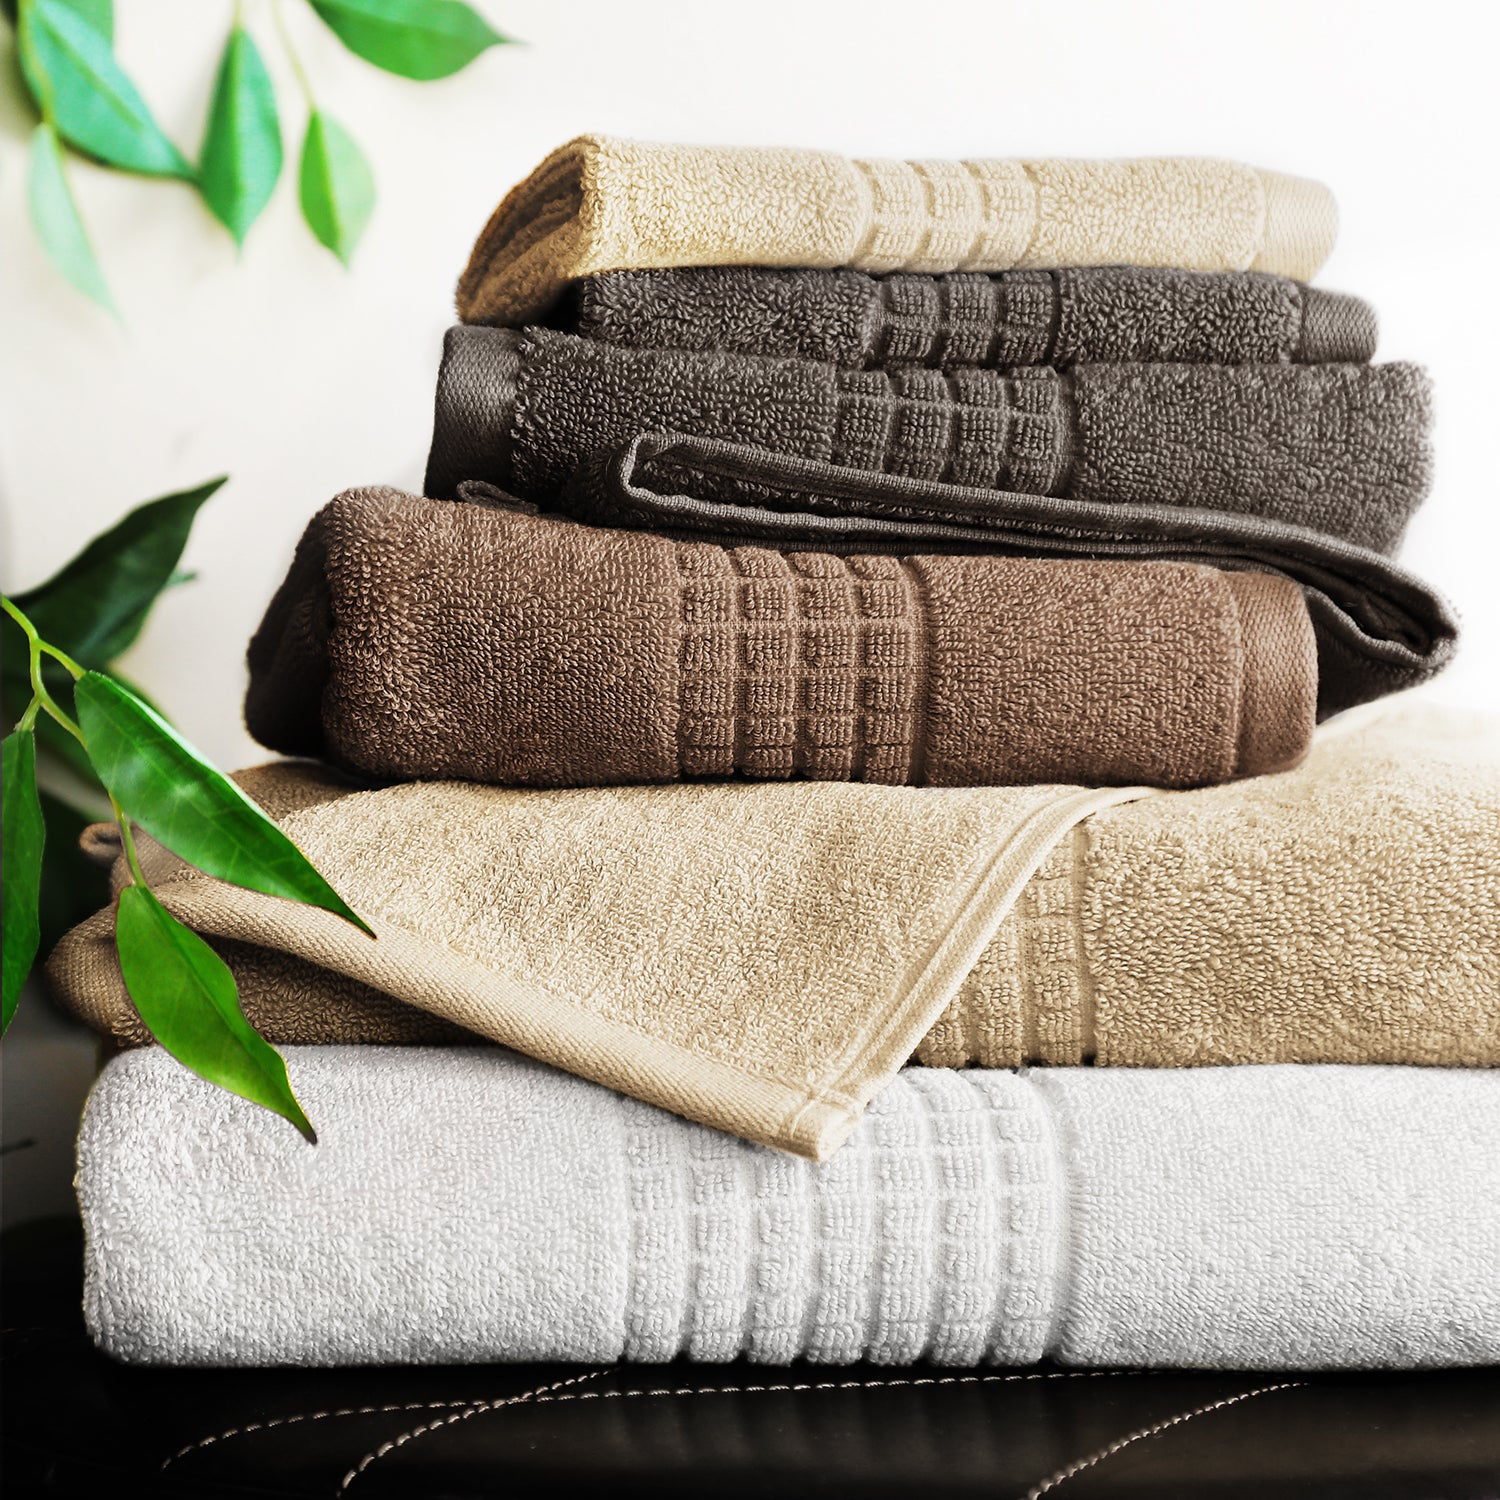 WAAAY Lux - Luxury Large Set of Towels, 100% Egyptian Cotton